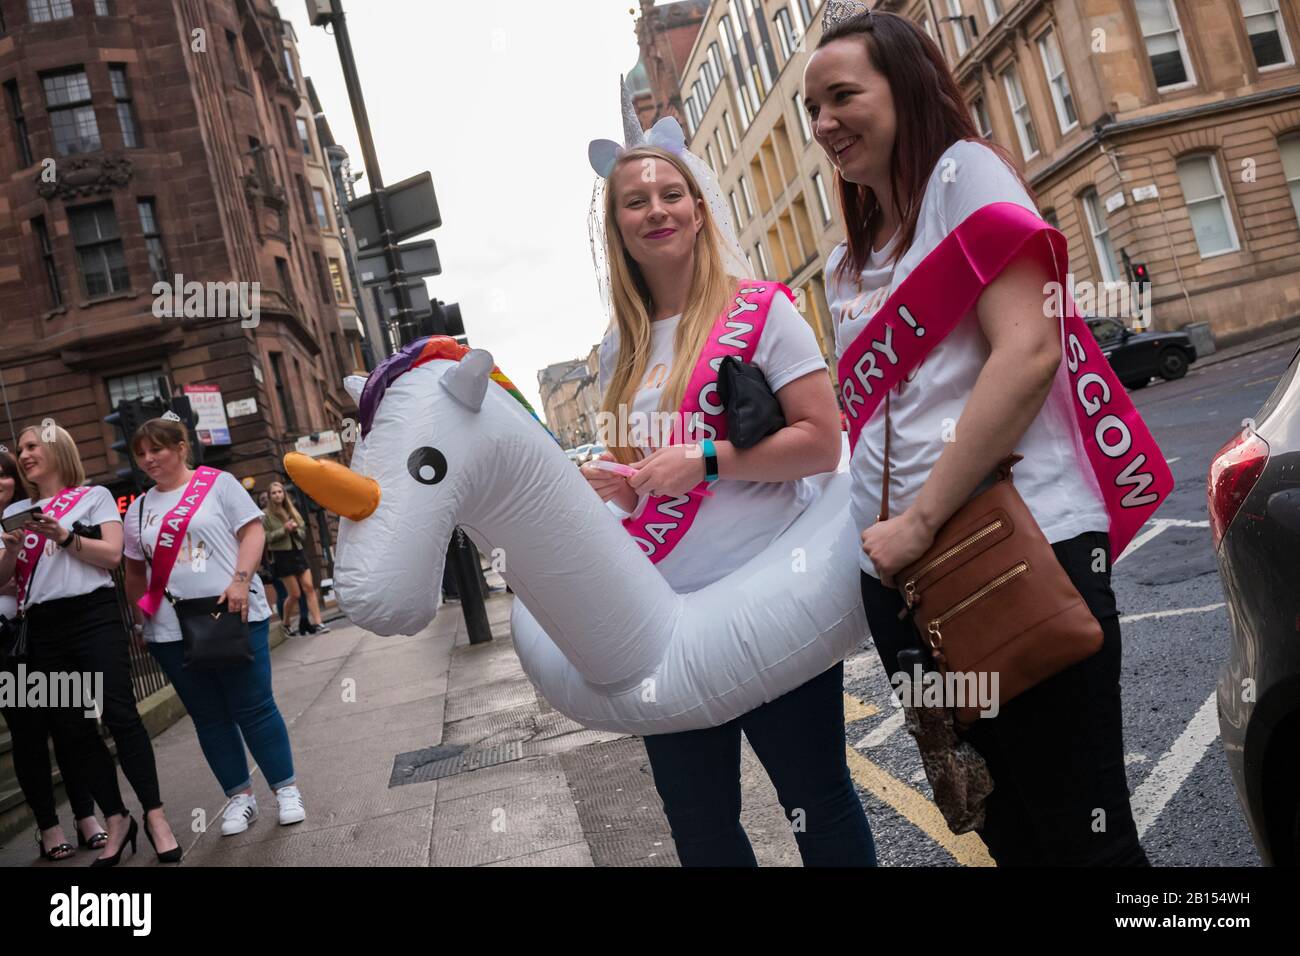 Glasgow, Scotland/UK, June 29, 2019: A bride, wearing a unicorn head piece with a veil and unicorn floatation device, walks the streets of Glasgow wit Stock Photo